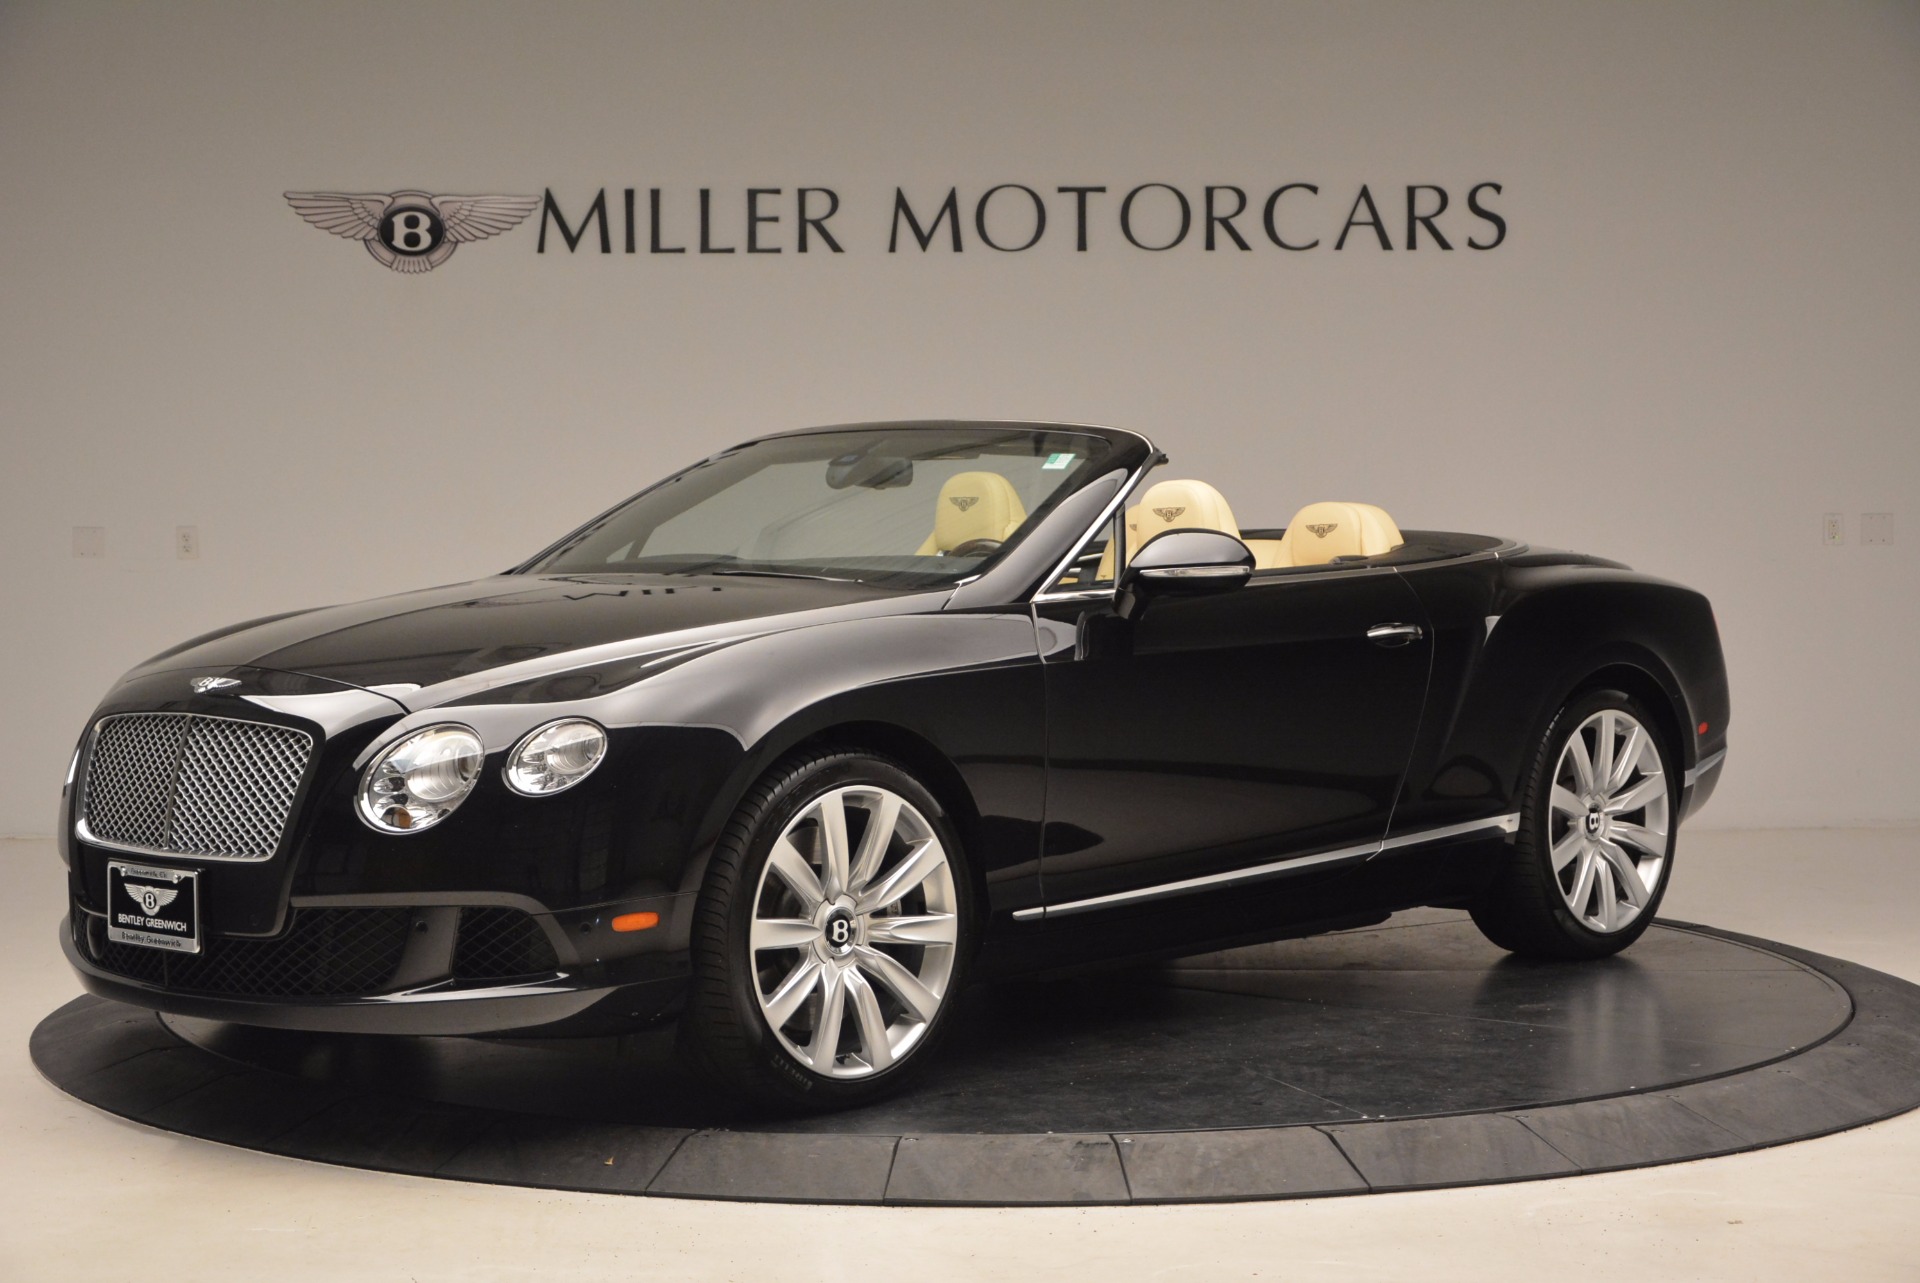 2014 Bentley Continental GT V8 S Review: Quality, Comfort and Luxury -  Motor Review